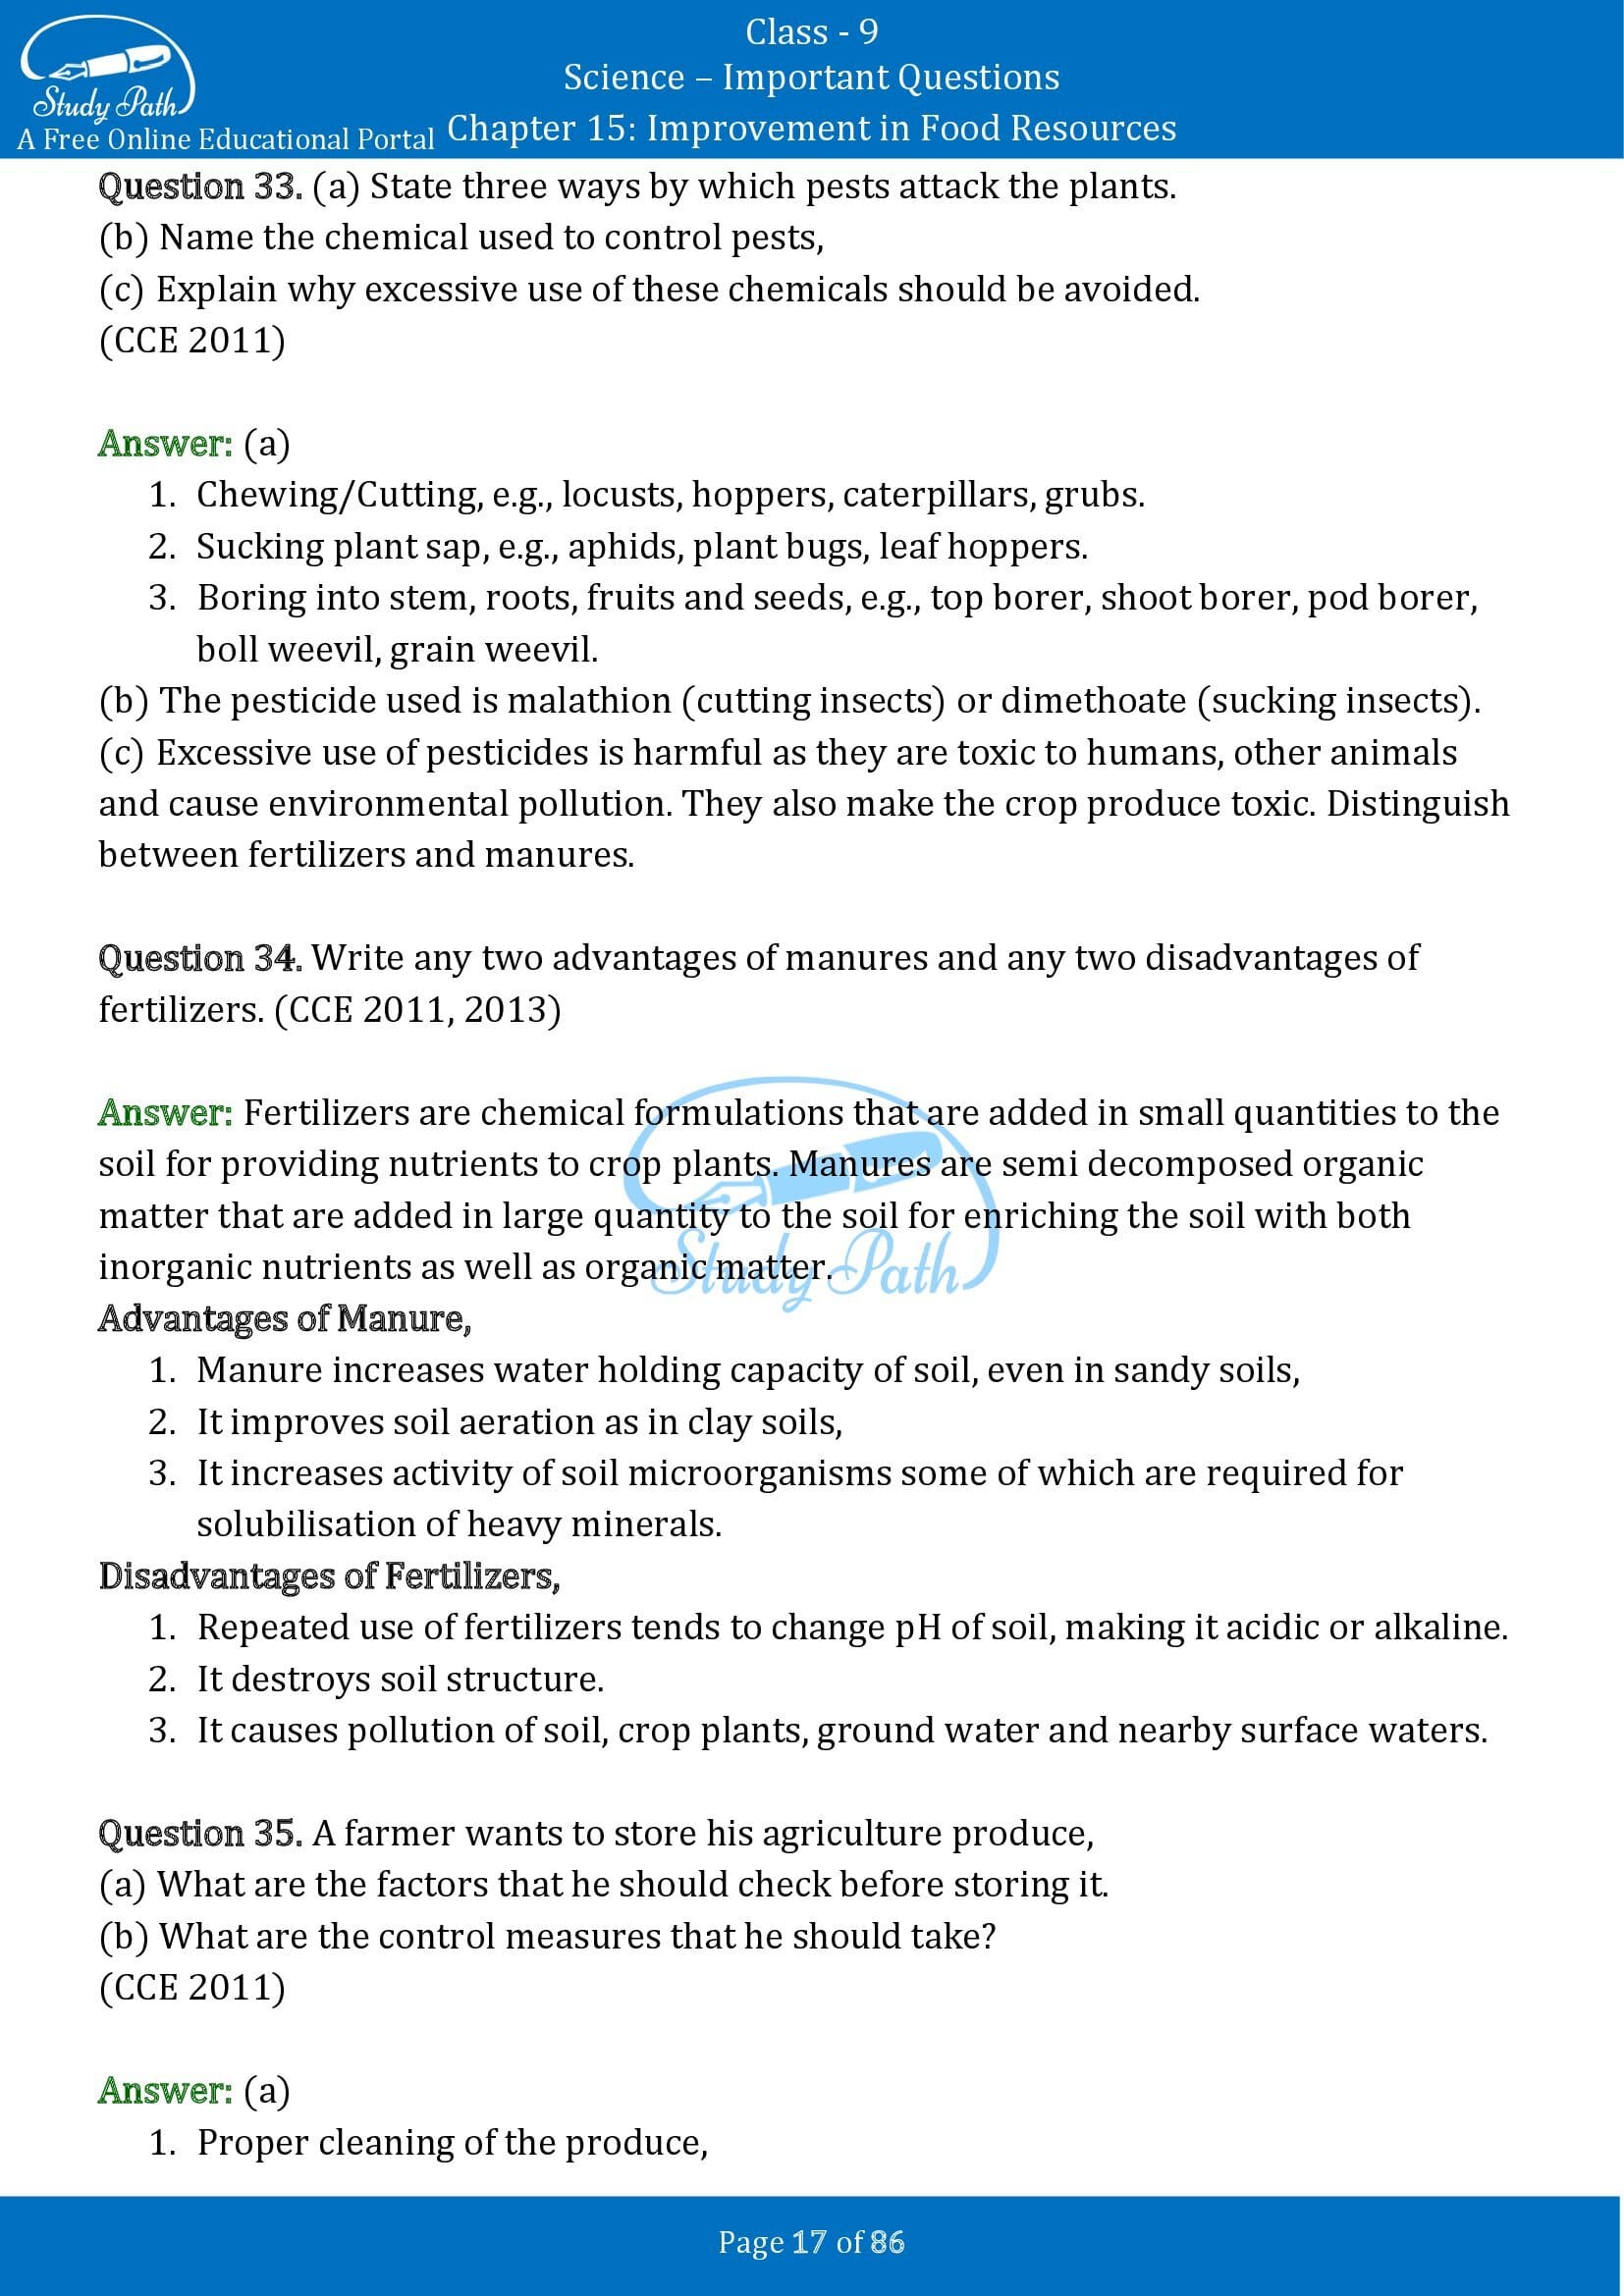 Important Questions for Class 9 Science Chapter 15 Improvement in Food Resources 00017